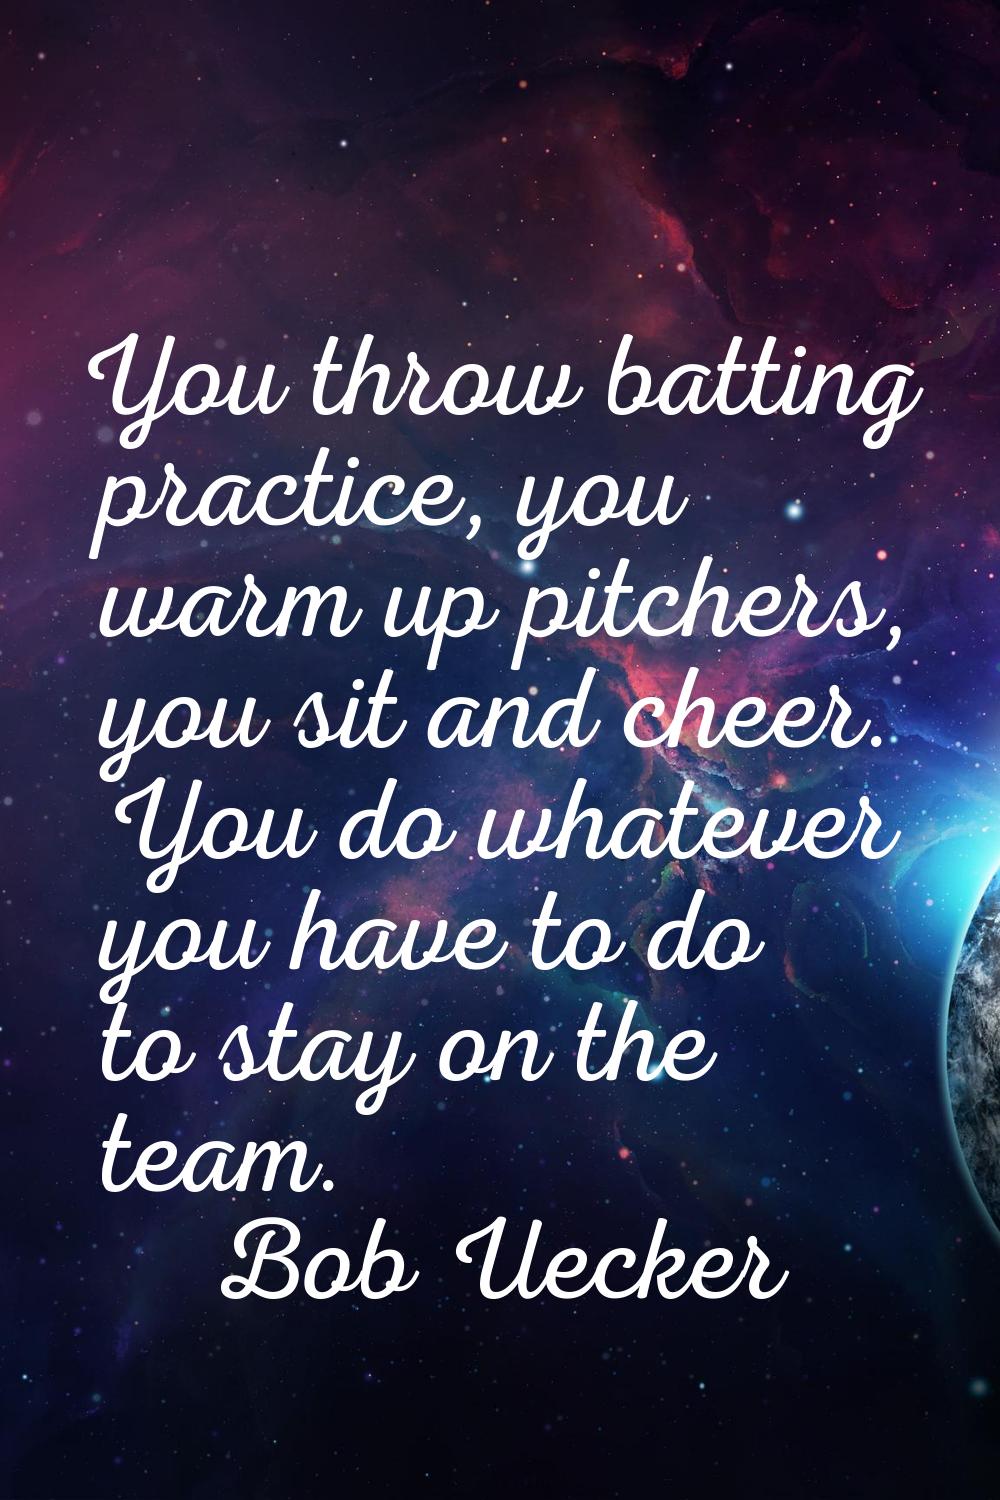 You throw batting practice, you warm up pitchers, you sit and cheer. You do whatever you have to do